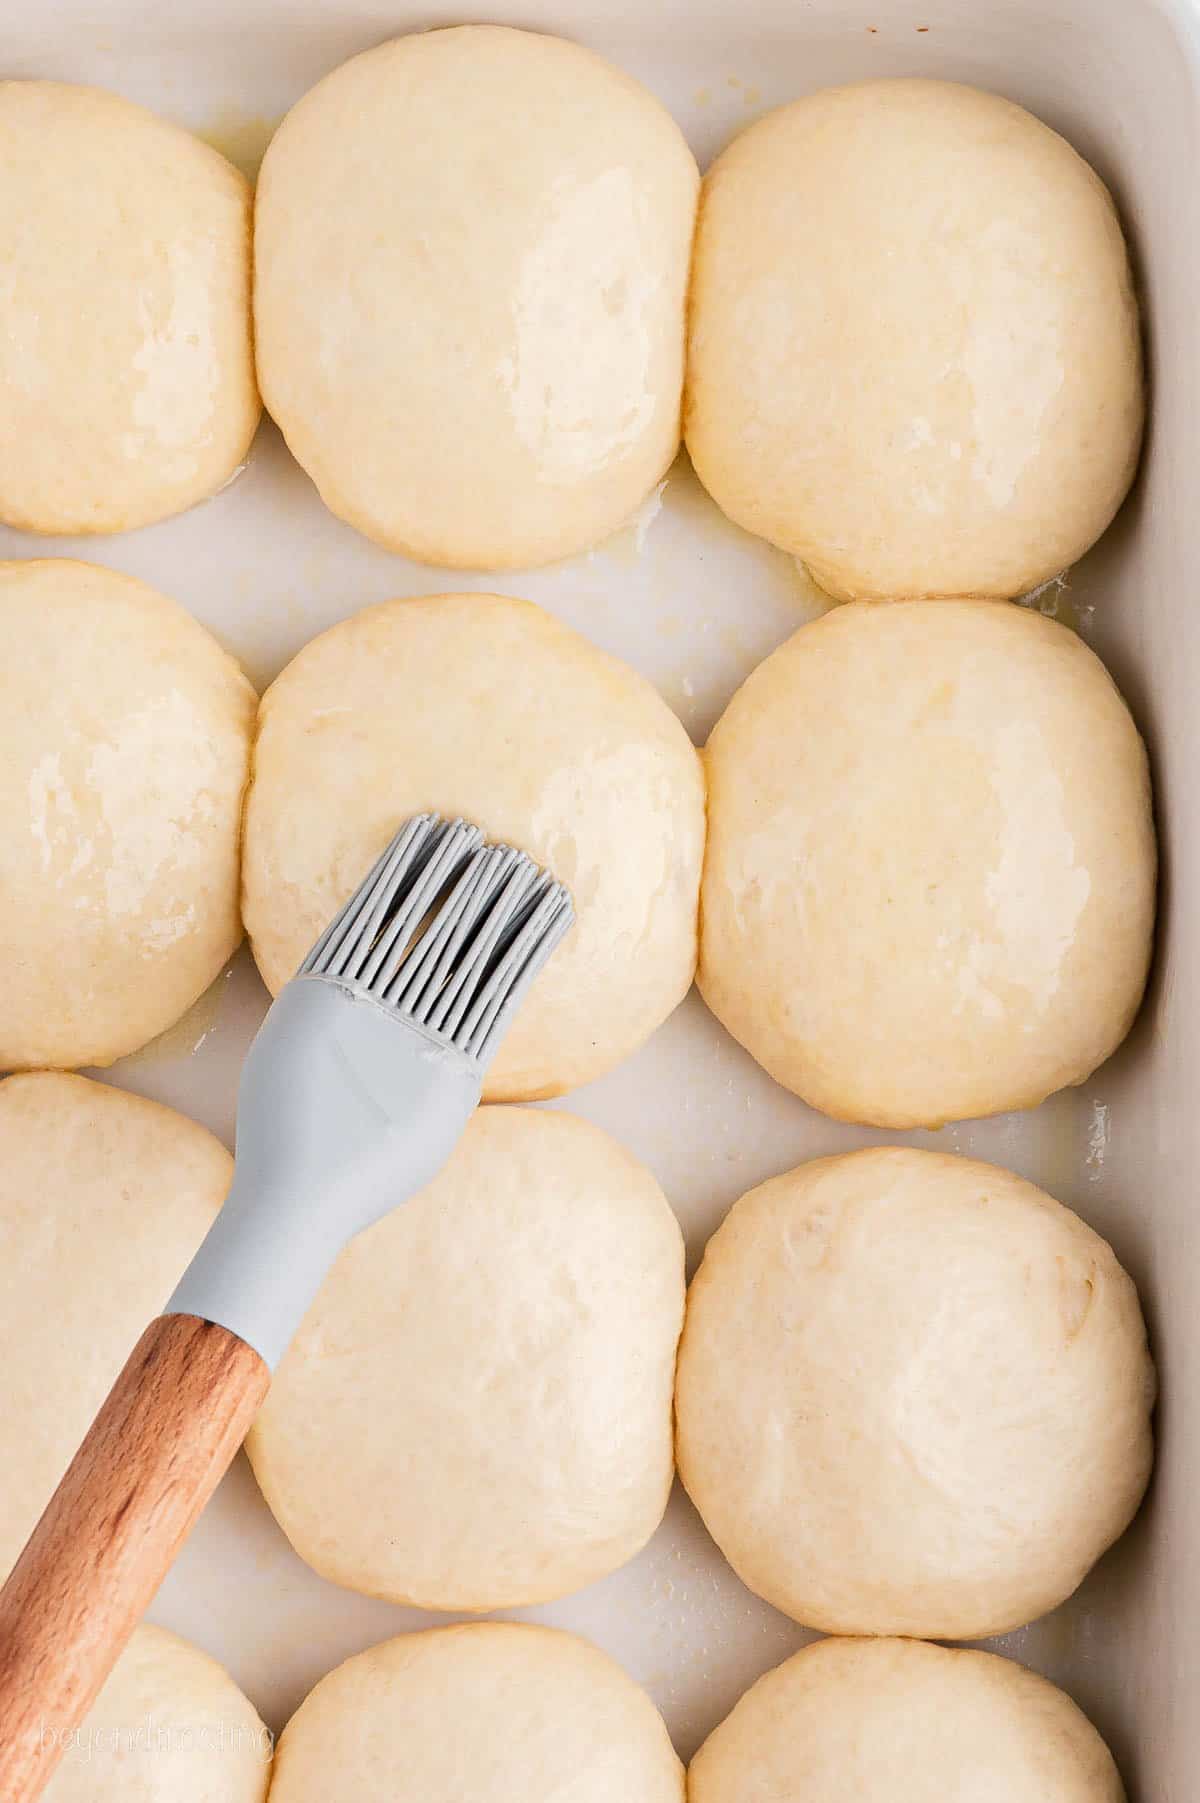 Butter being brushed on unbaked rolls